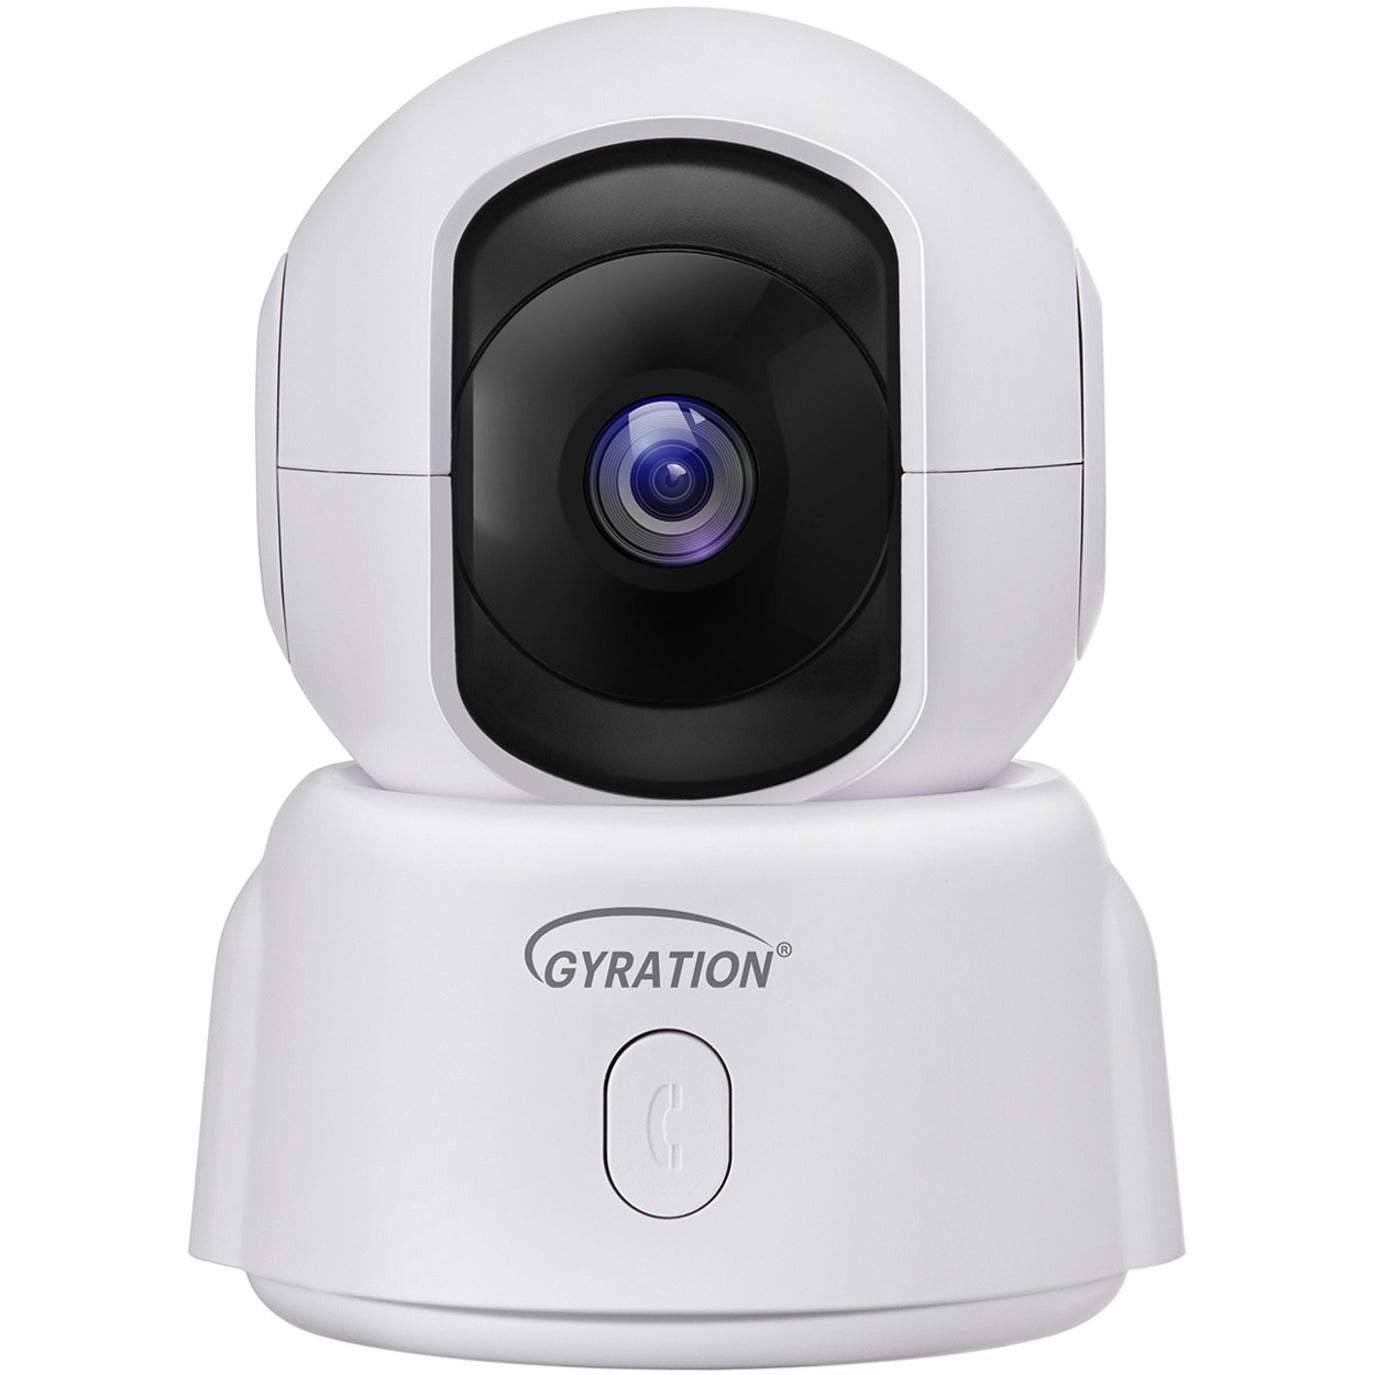 Gyration CYBERVIEW 2000 2MP Smart WiFi Pan/Tilt Camera, High Quality 1080p Resolution, Motion Detection, Night Vision